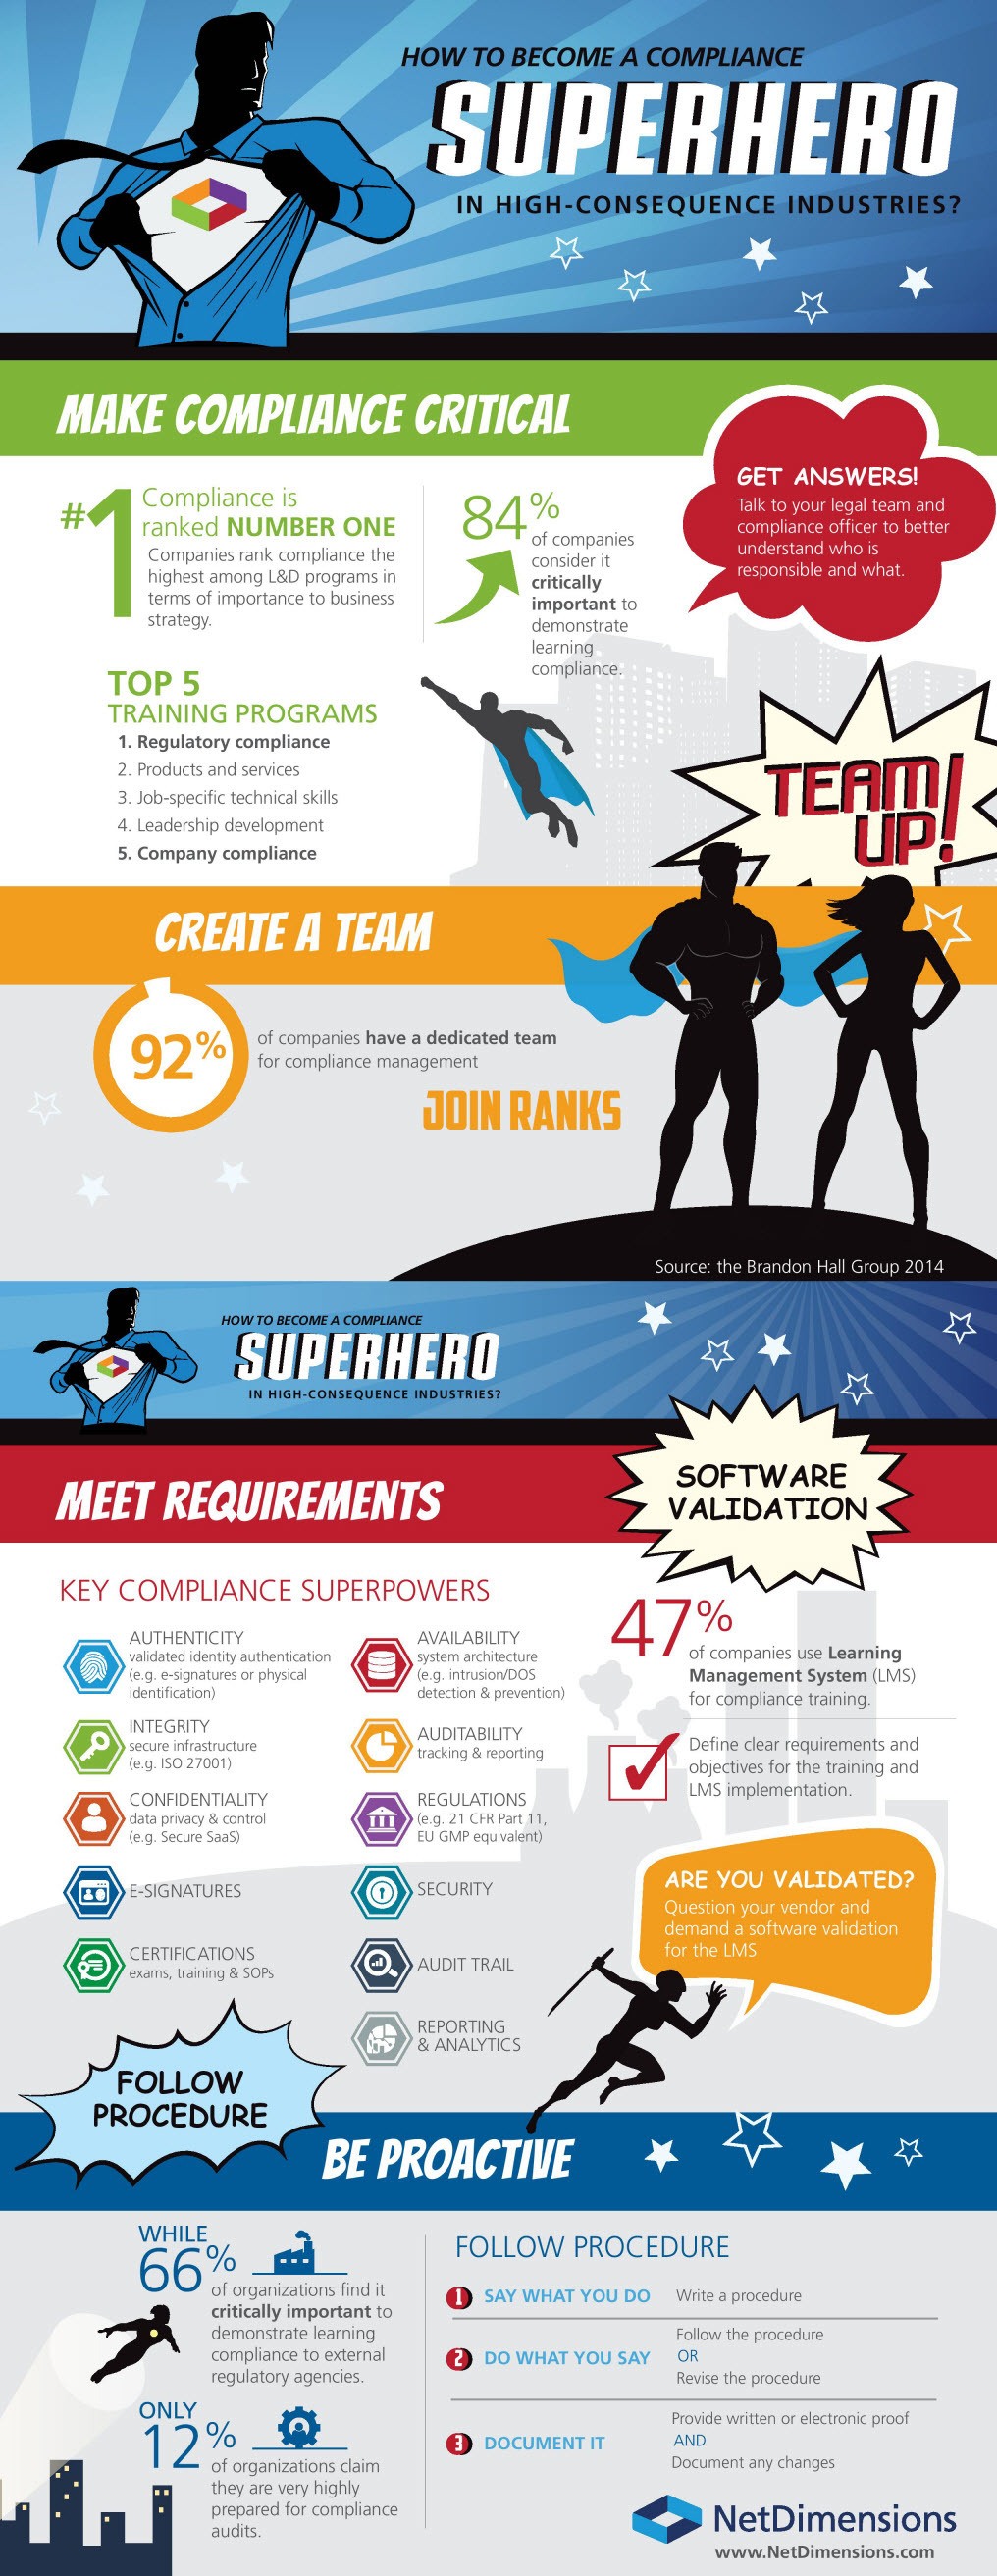 How to Become a Compliance Superhero Infographic